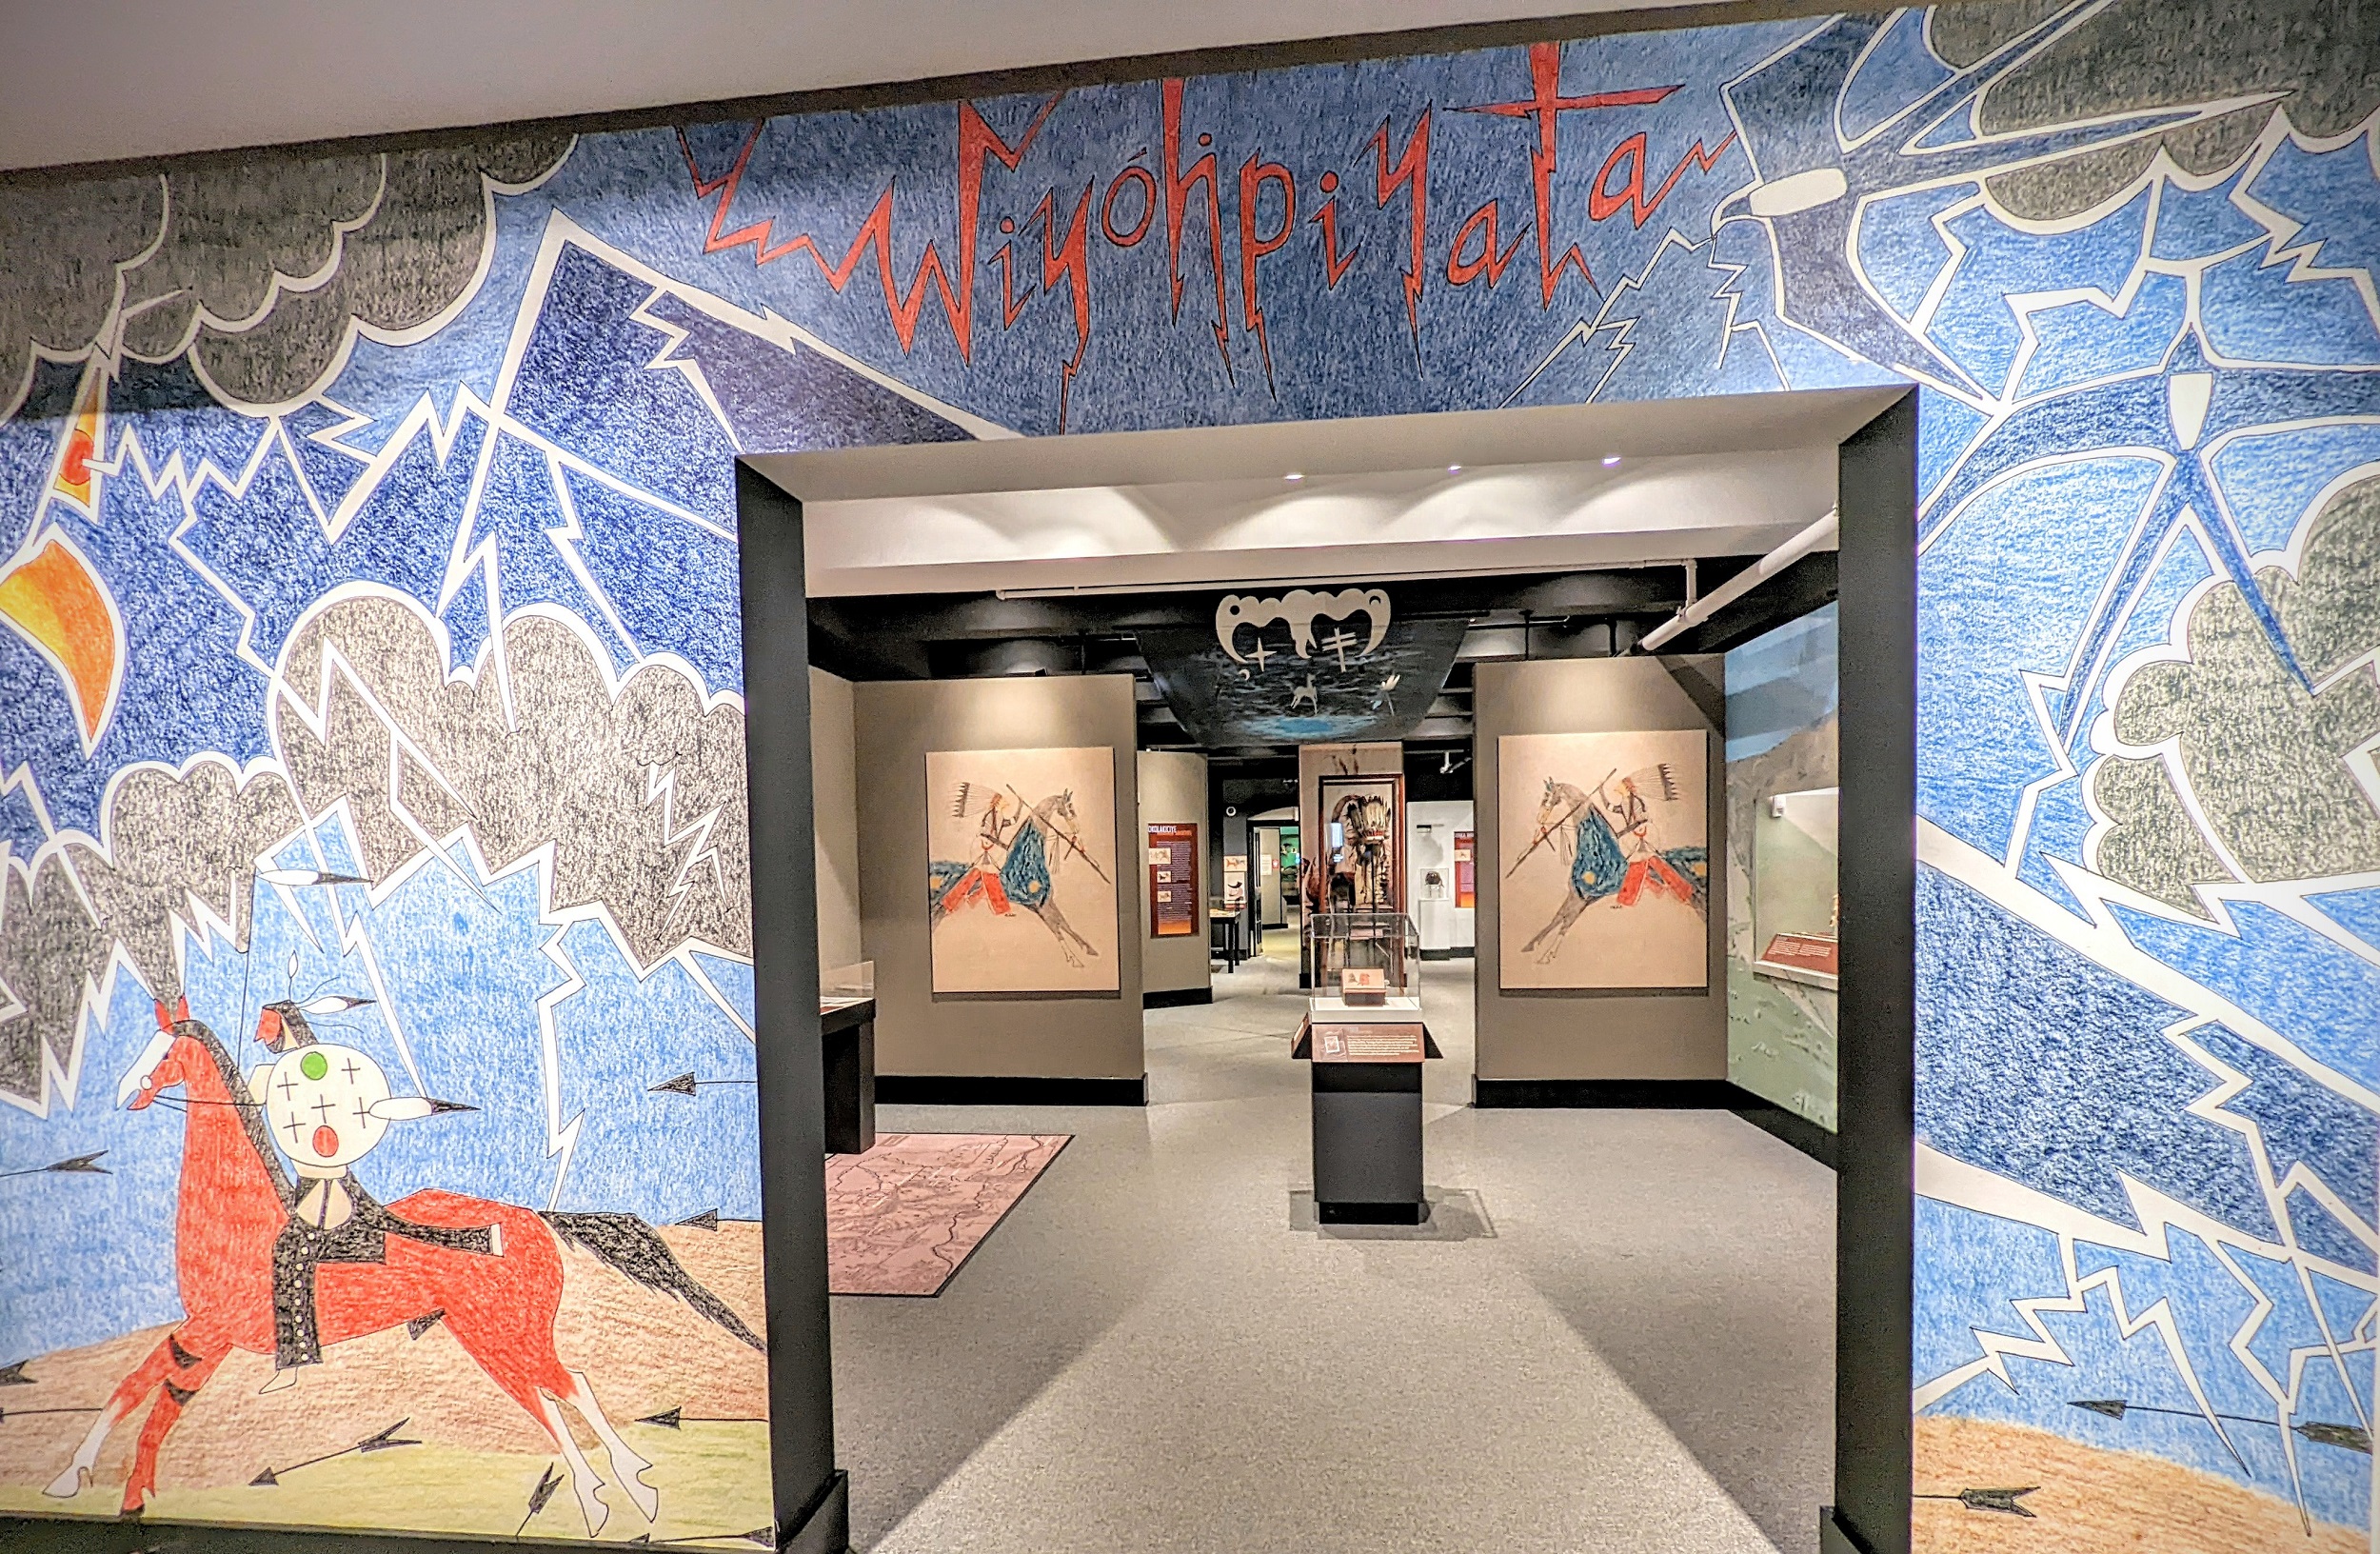 Entrance to a museum gallery, with the entrance wall decorated in jagged landscape forms, with a horse and rider on the left, birds on the right, and the word "Wiyohpiyata" above the doorway